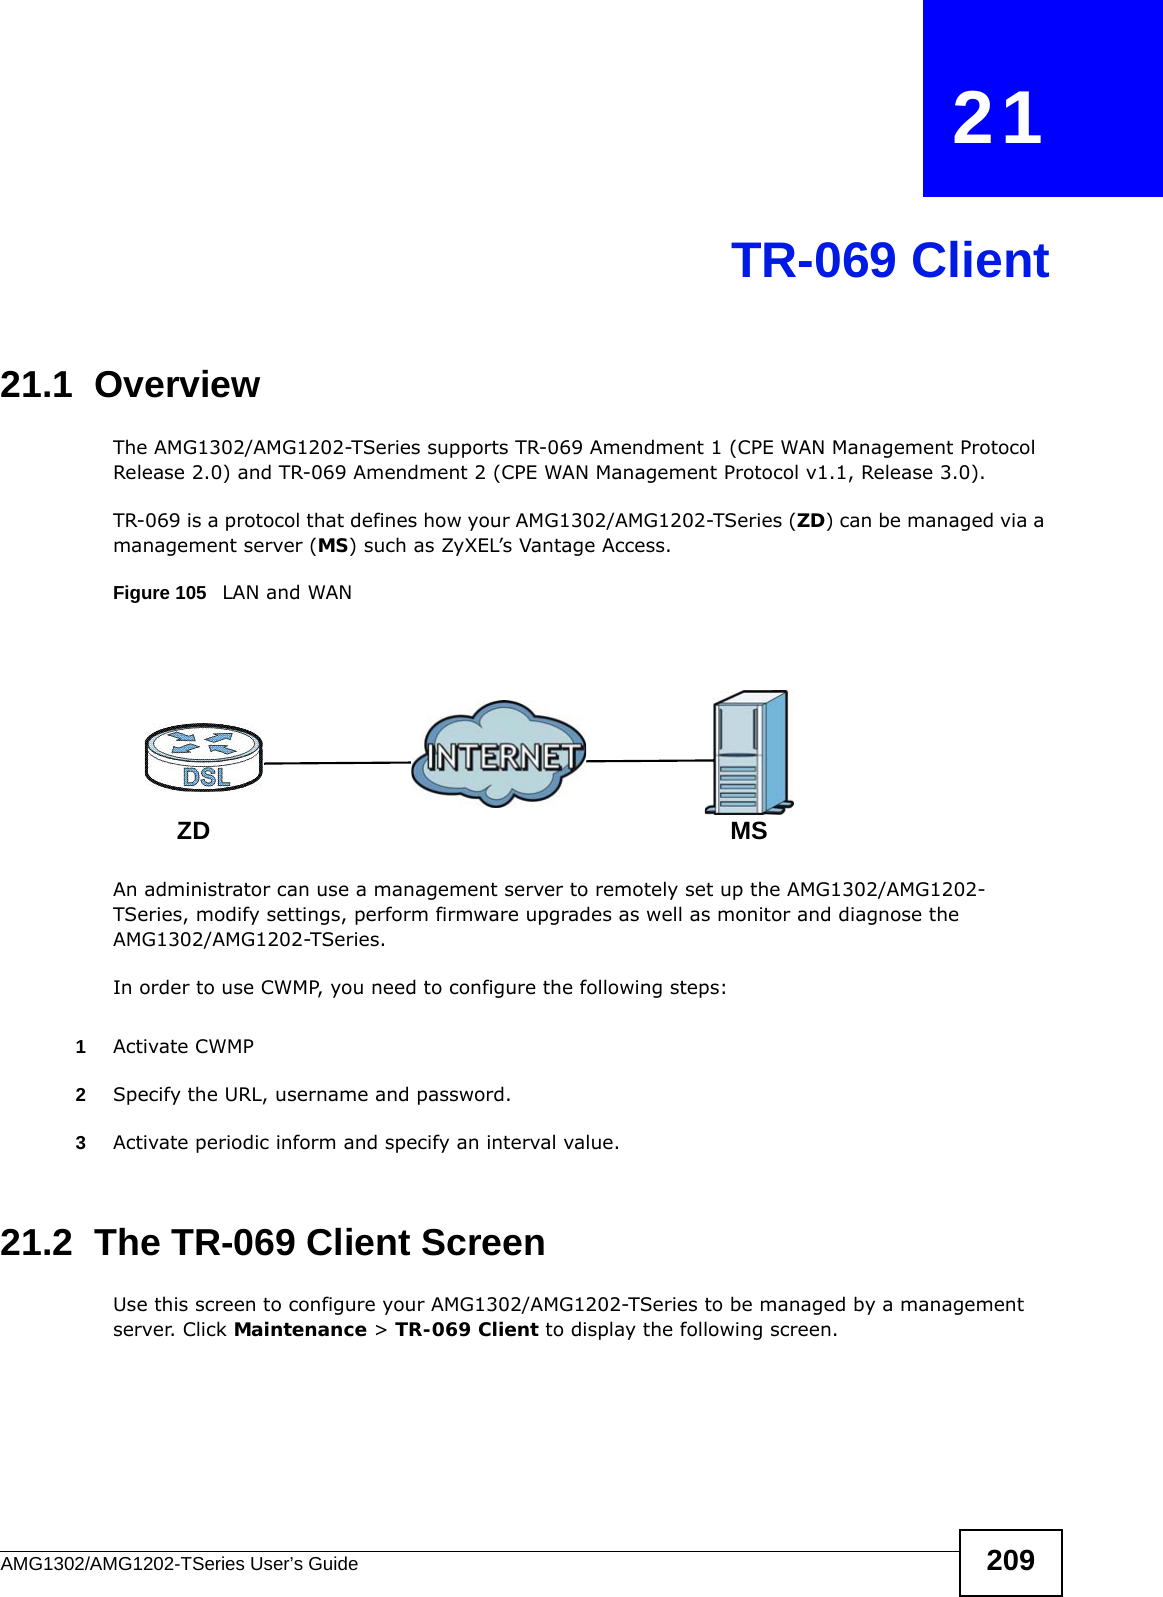 AMG1302/AMG1202-TSeries User’s Guide 209CHAPTER   21TR-069 Client21.1  OverviewThe AMG1302/AMG1202-TSeries supports TR-069 Amendment 1 (CPE WAN Management Protocol Release 2.0) and TR-069 Amendment 2 (CPE WAN Management Protocol v1.1, Release 3.0).TR-069 is a protocol that defines how your AMG1302/AMG1202-TSeries (ZD) can be managed via a management server (MS) such as ZyXEL’s Vantage Access. Figure 105   LAN and WANAn administrator can use a management server to remotely set up the AMG1302/AMG1202-TSeries, modify settings, perform firmware upgrades as well as monitor and diagnose the AMG1302/AMG1202-TSeries. In order to use CWMP, you need to configure the following steps:1Activate CWMP2Specify the URL, username and password.3Activate periodic inform and specify an interval value.21.2  The TR-069 Client ScreenUse this screen to configure your AMG1302/AMG1202-TSeries to be managed by a management server. Click Maintenance &gt; TR-069 Client to display the following screen.MSZD